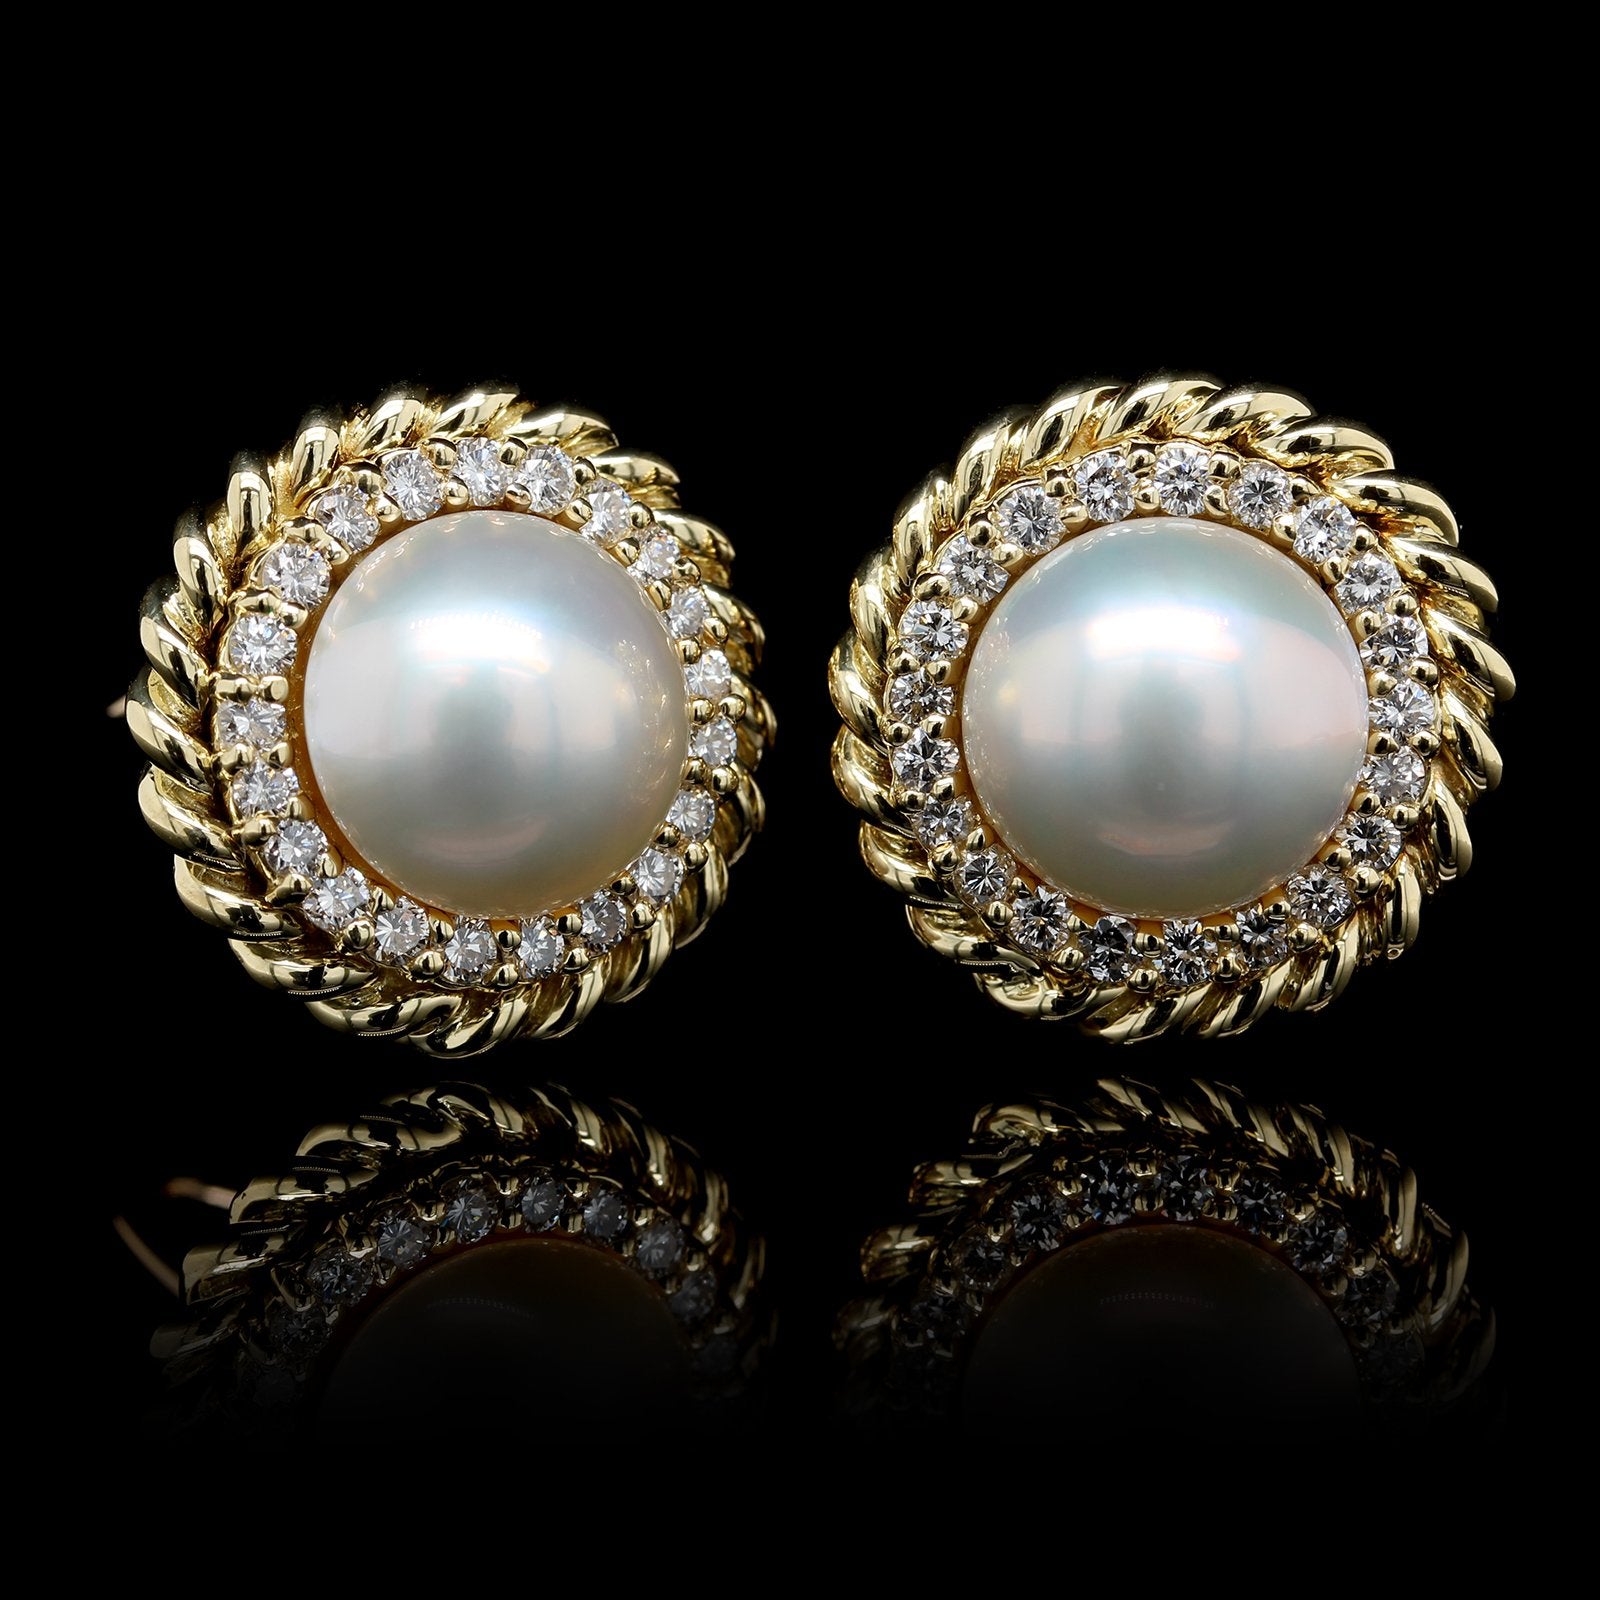 18K Yellow Gold Estate Cultured Mabe Pearl and Diamond Earrings